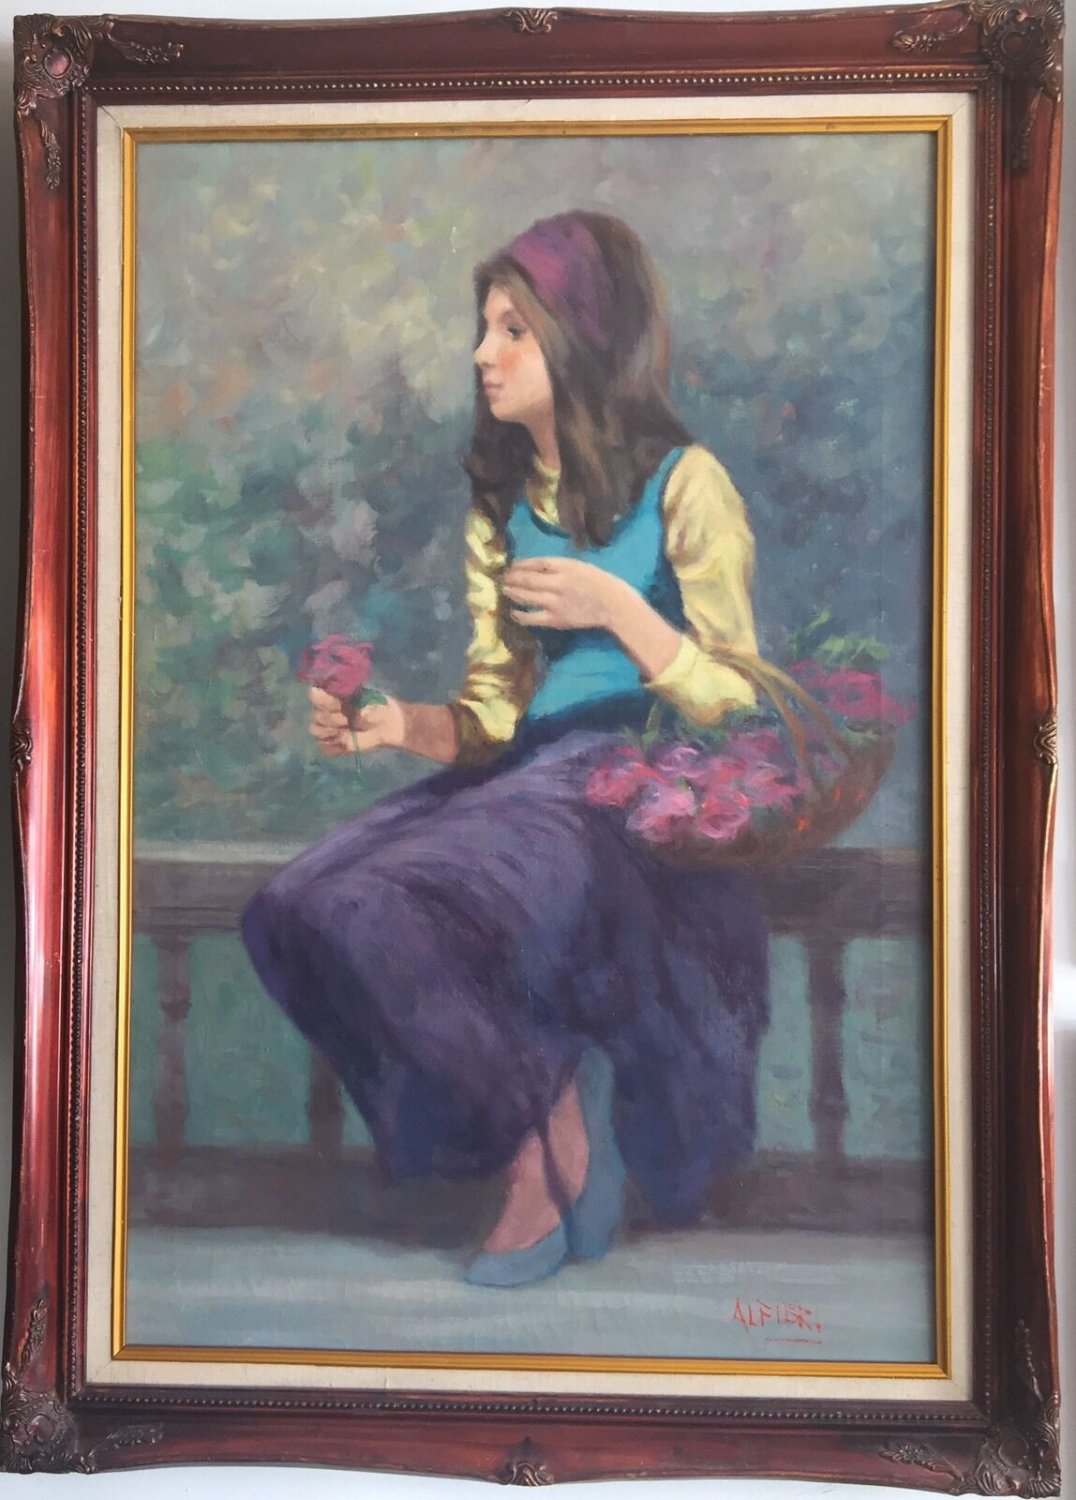 PHILIPPE ALFIERI GIRL WITH ROSES PAINTING OIL ON CANVAS SIGNED 1960s ITALIAN